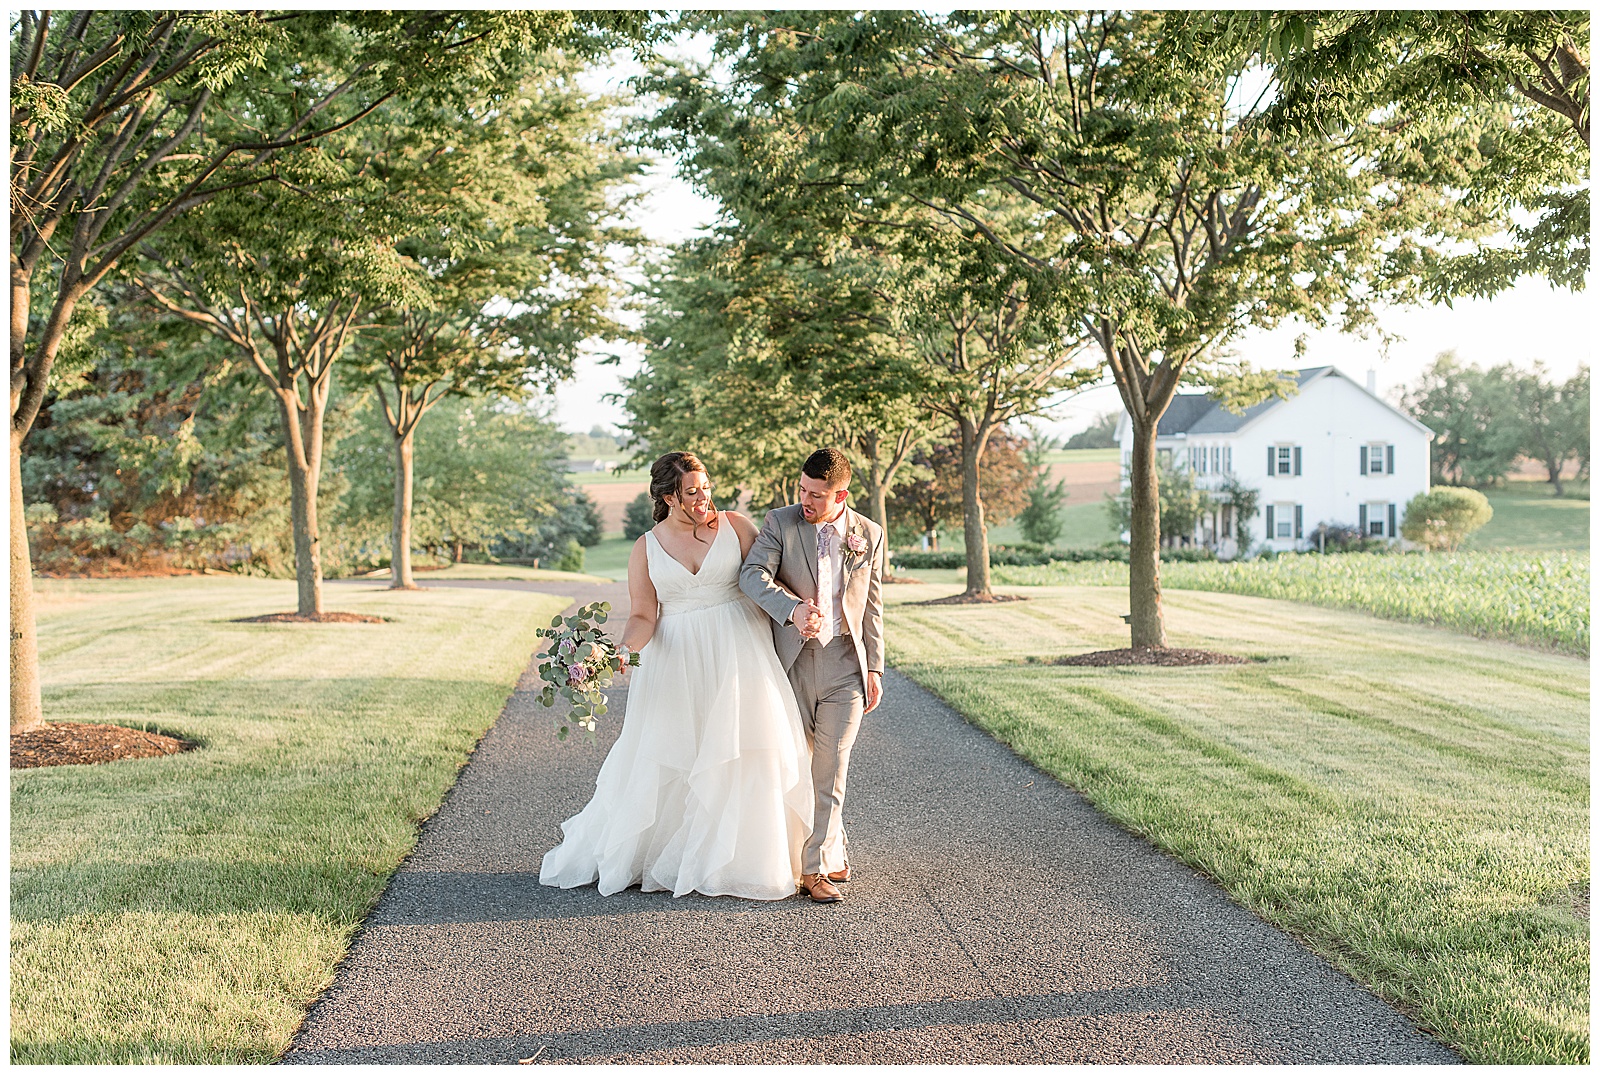 bride and groom walking silly towards camera along paved tree-lined pathway on sunny wedding day